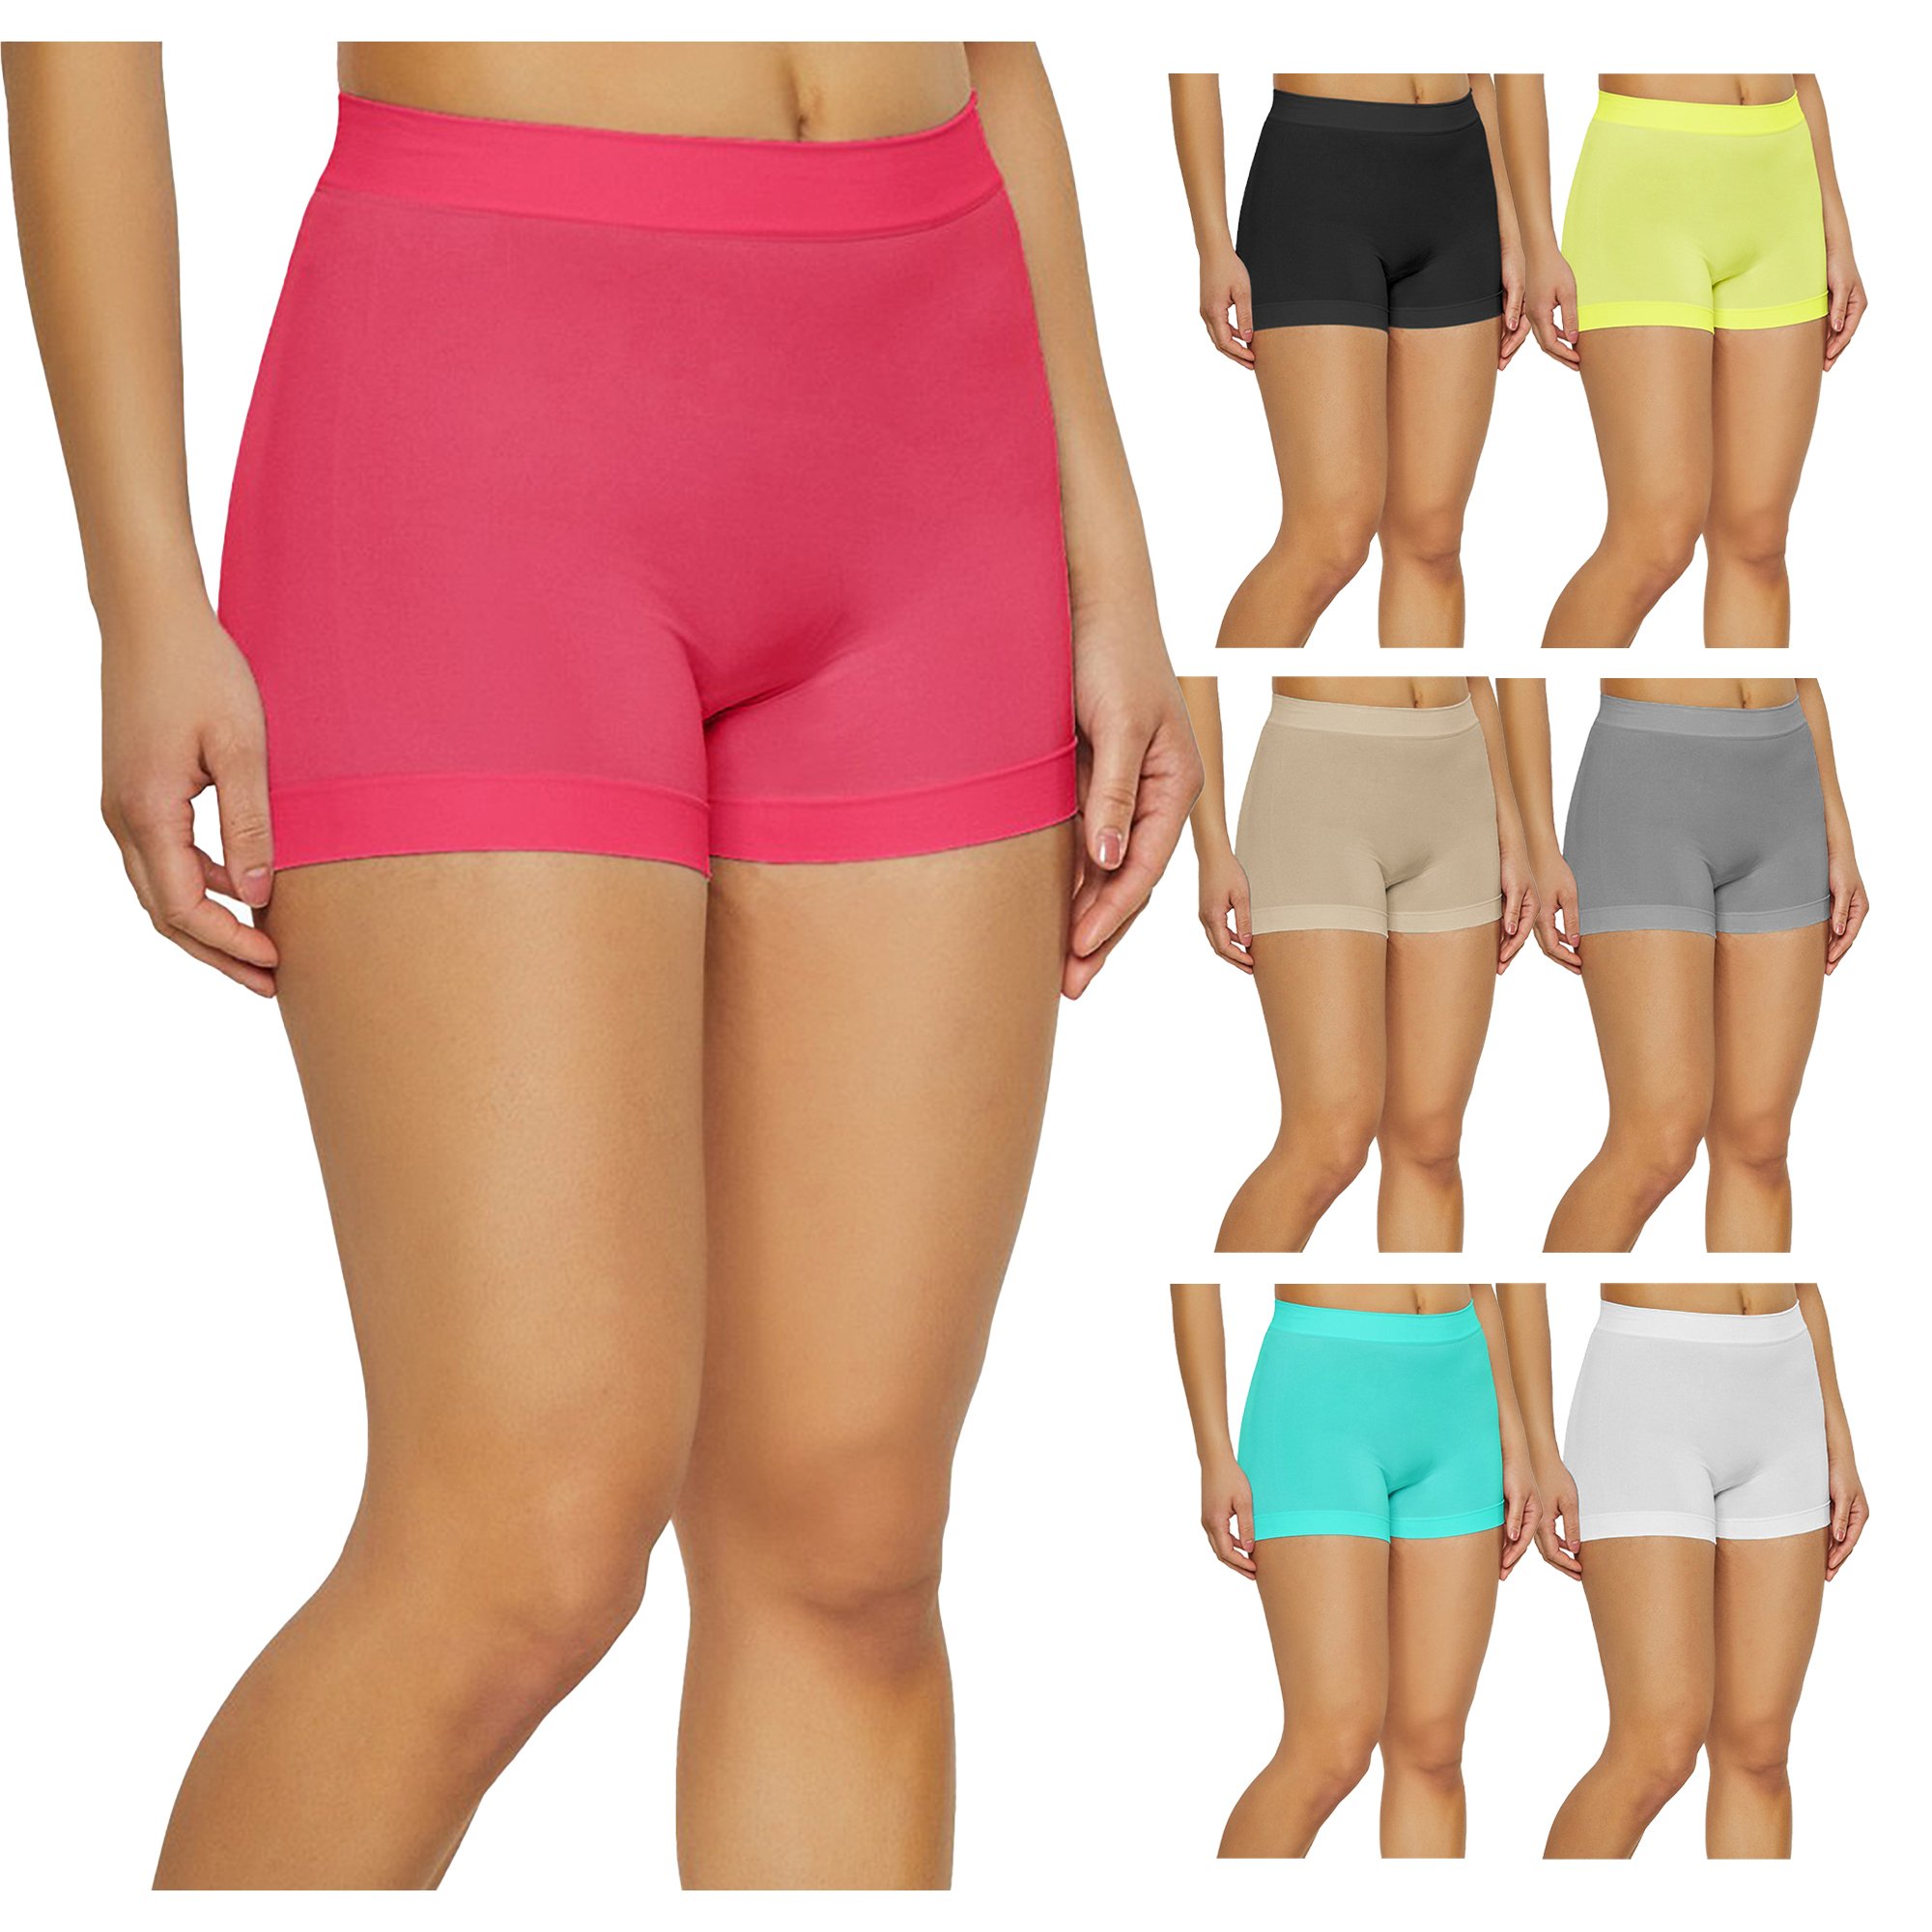 12-Pack Women's High Waisted Biker Bottom Shorts For Yoga Gym Running Ladies Pants - CORAL, S